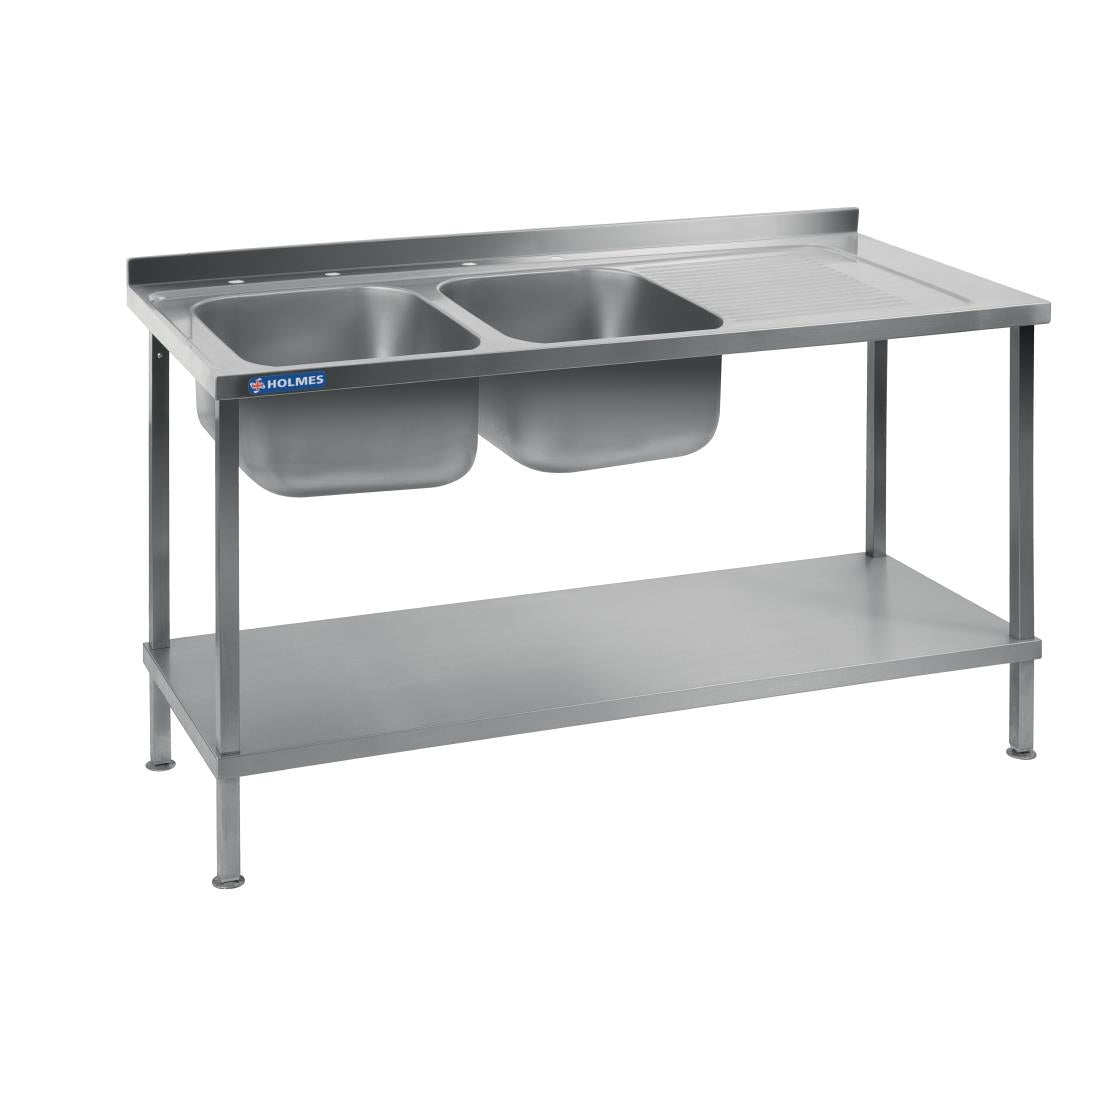 DR396 Holmes Fully Assembled Stainless Steel Sink Right Hand Drainer 1800mm JD Catering Equipment Solutions Ltd